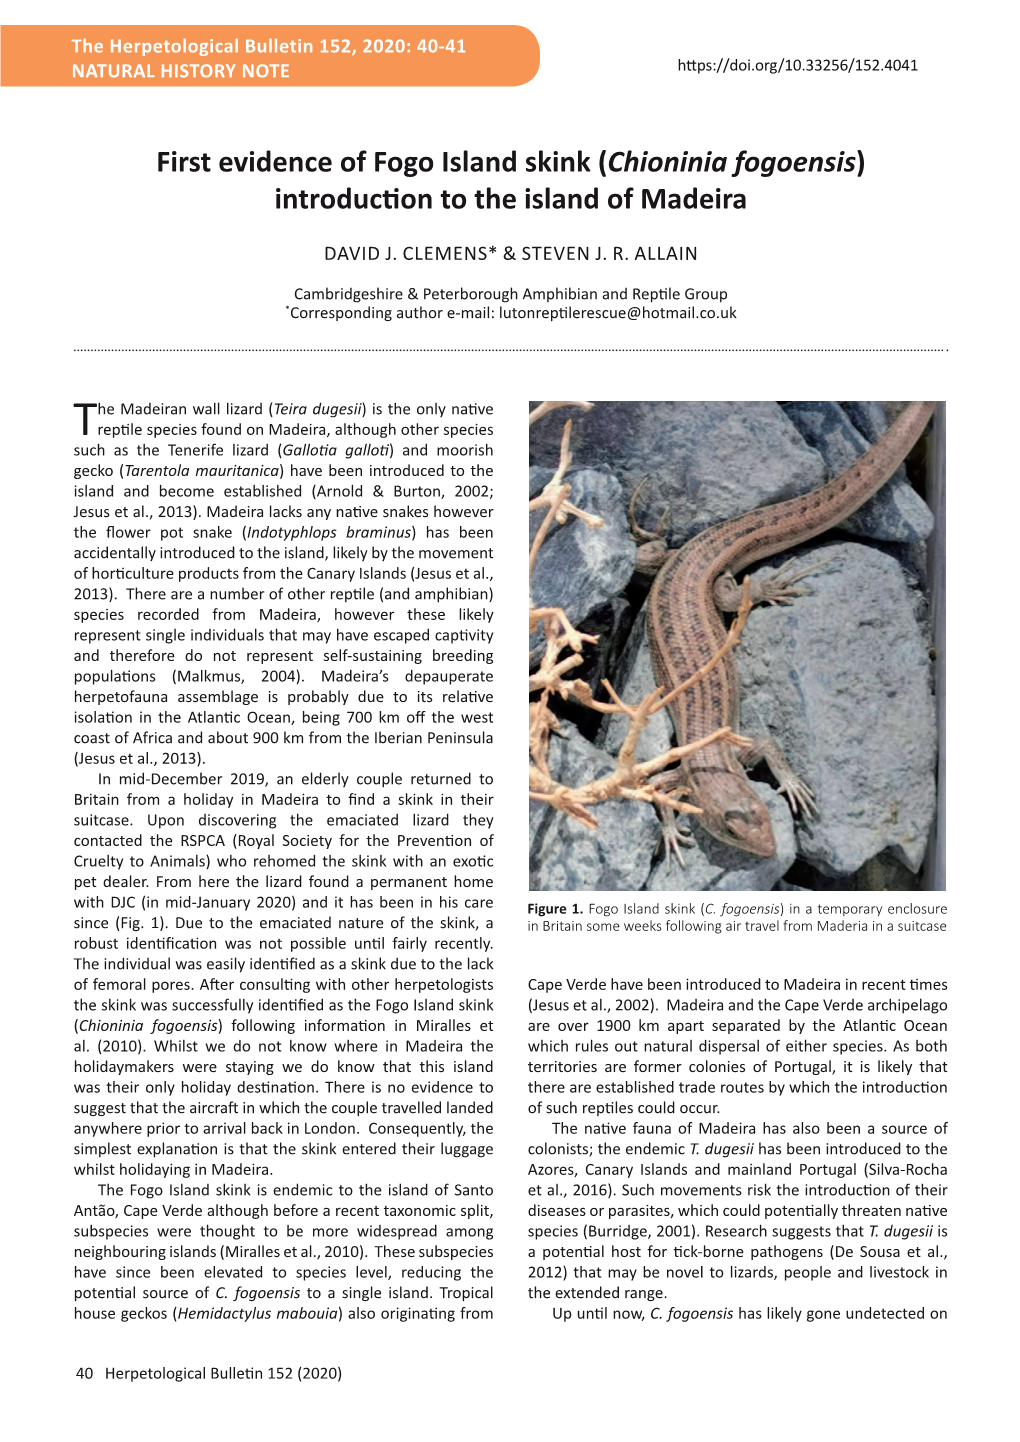 First Evidence of Fogo Island Skink (Chioninia Fogoensis) Introduction to the Island of Madeira